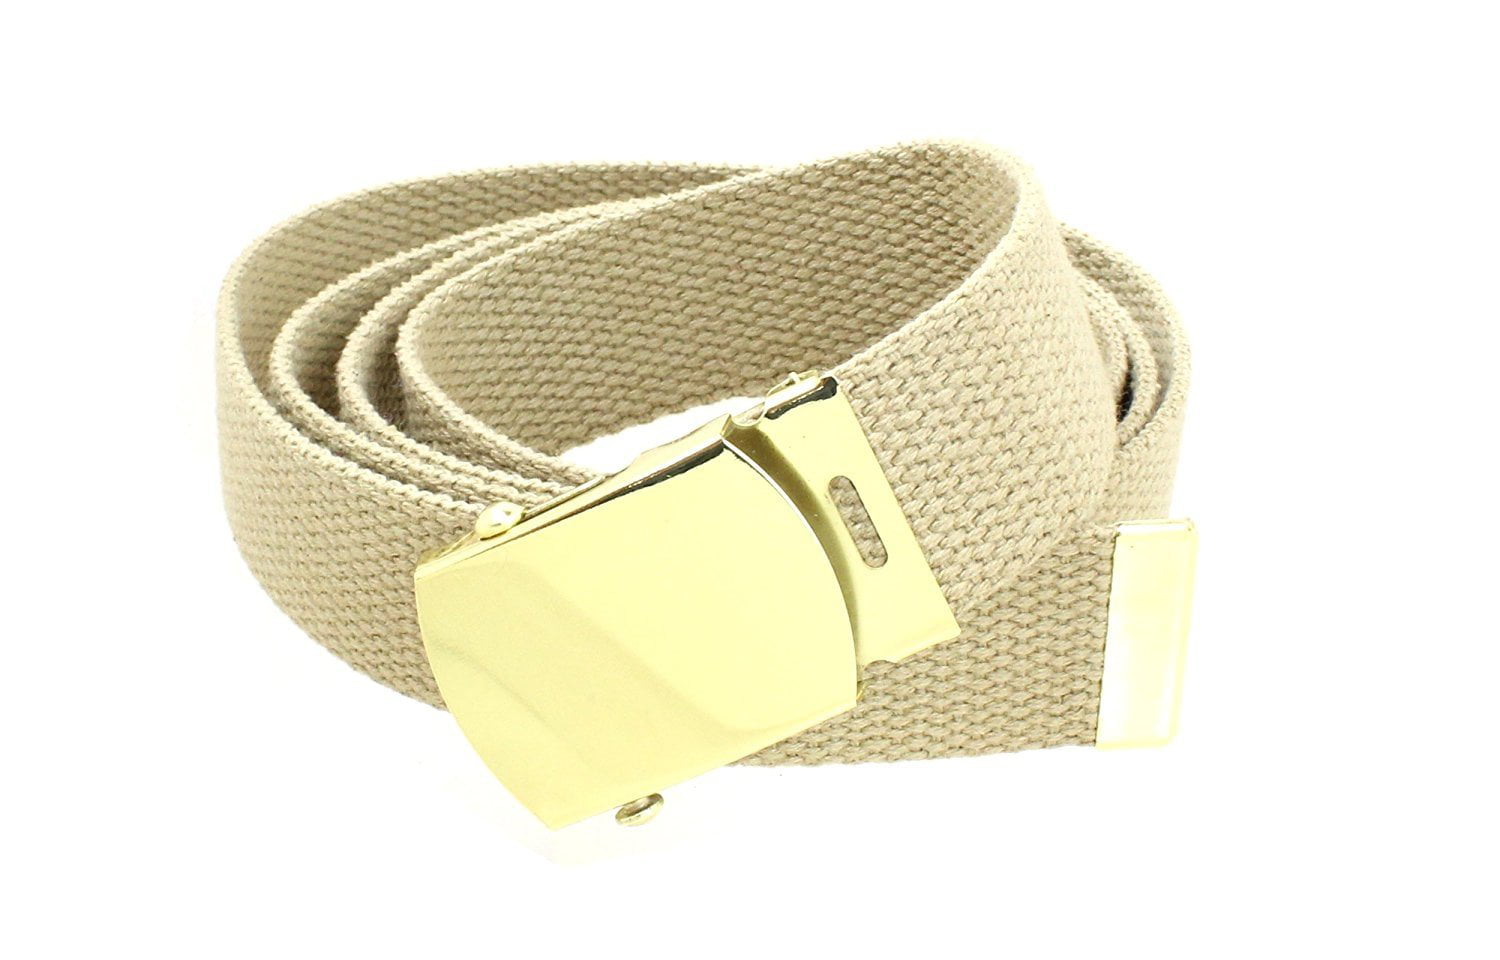 Military Canvas Web Belt With   Metal Buckle color Fabric size  54" LOT OF 2 